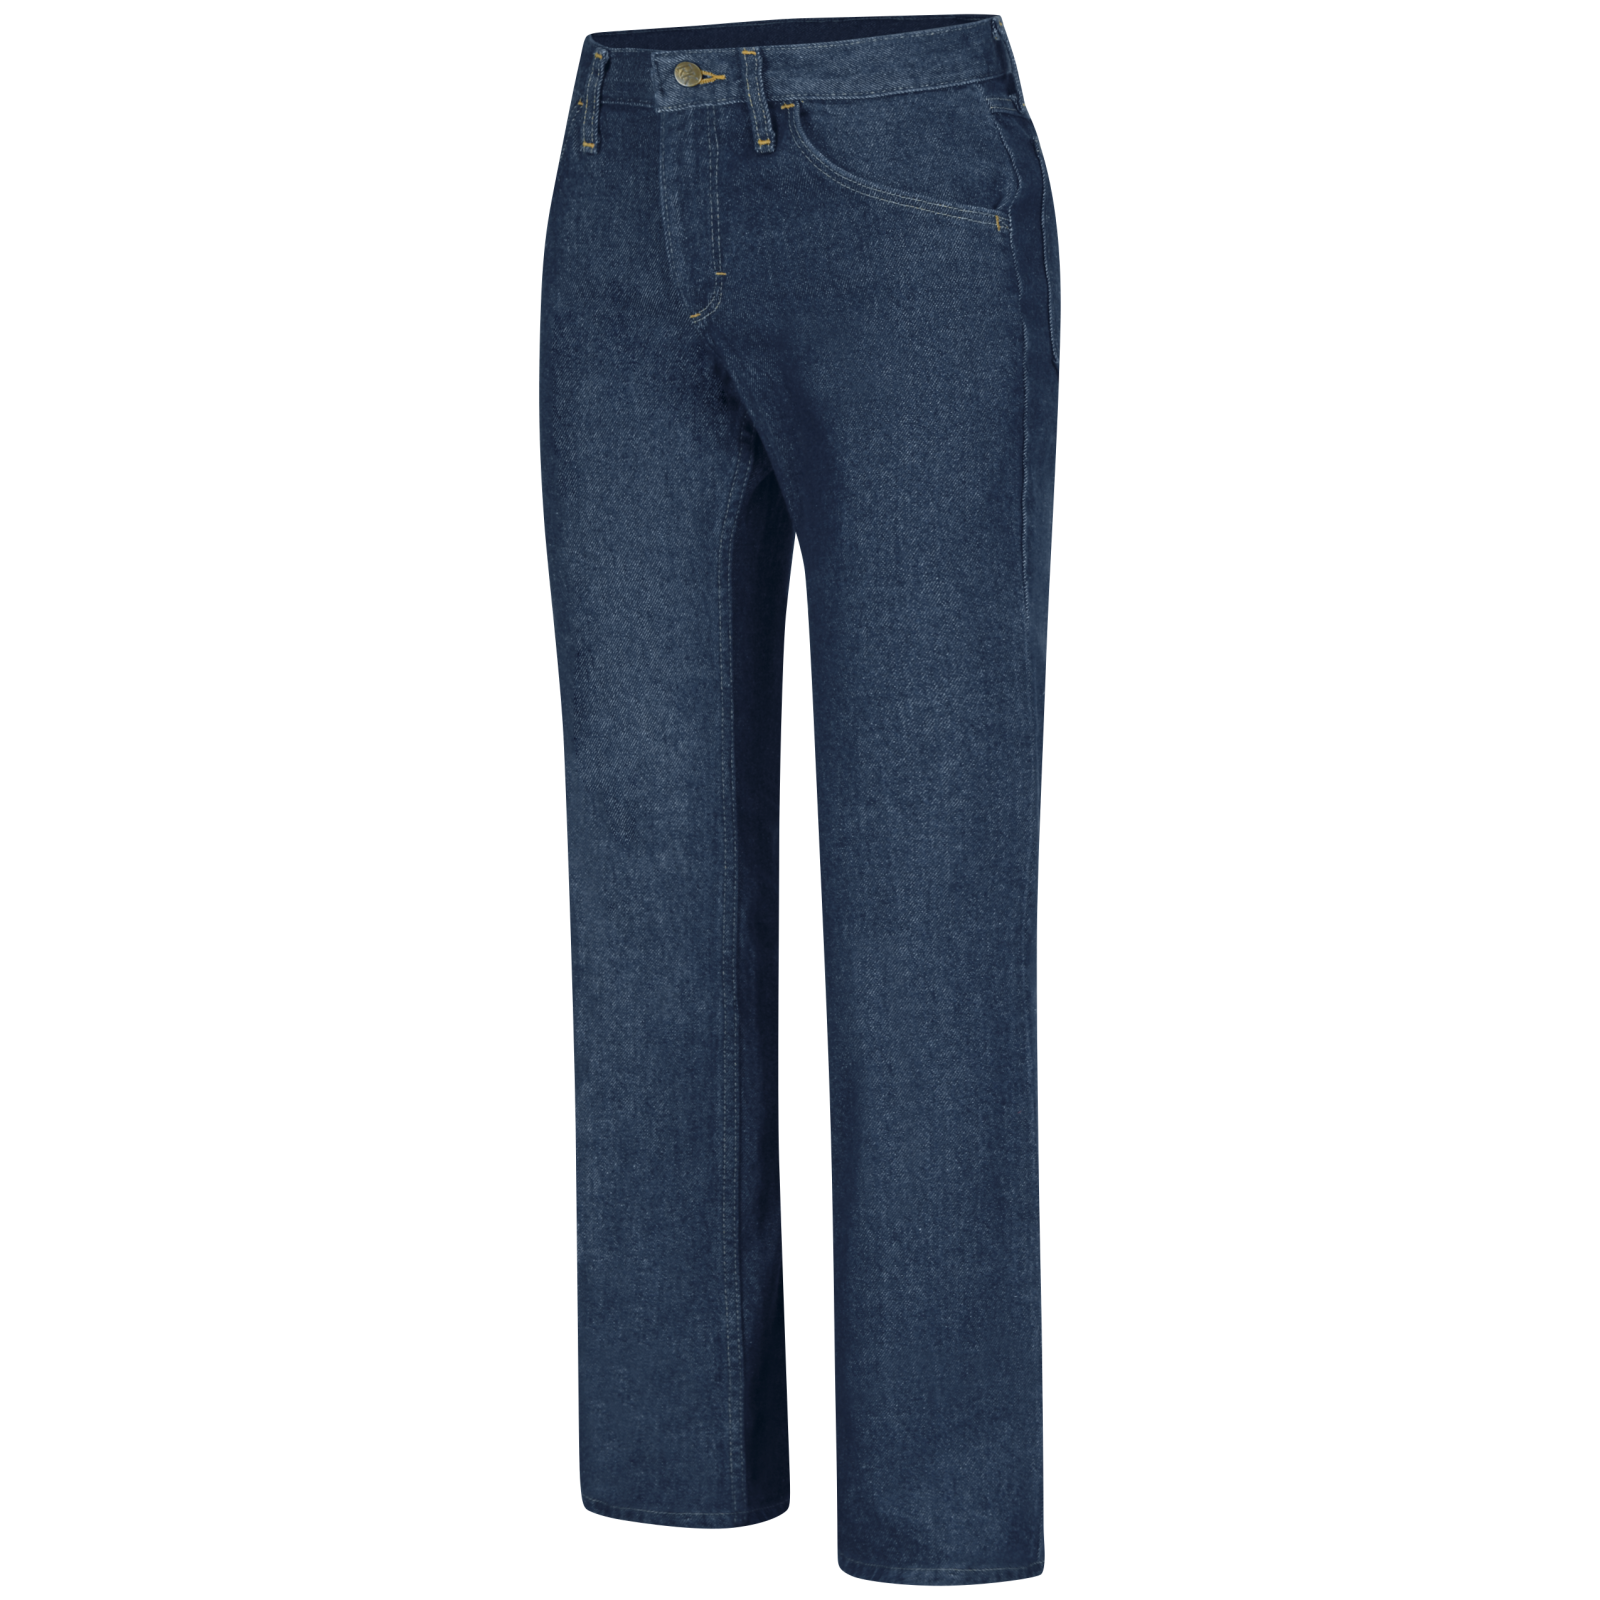 kut from the kloth connie ankle skinny jeans